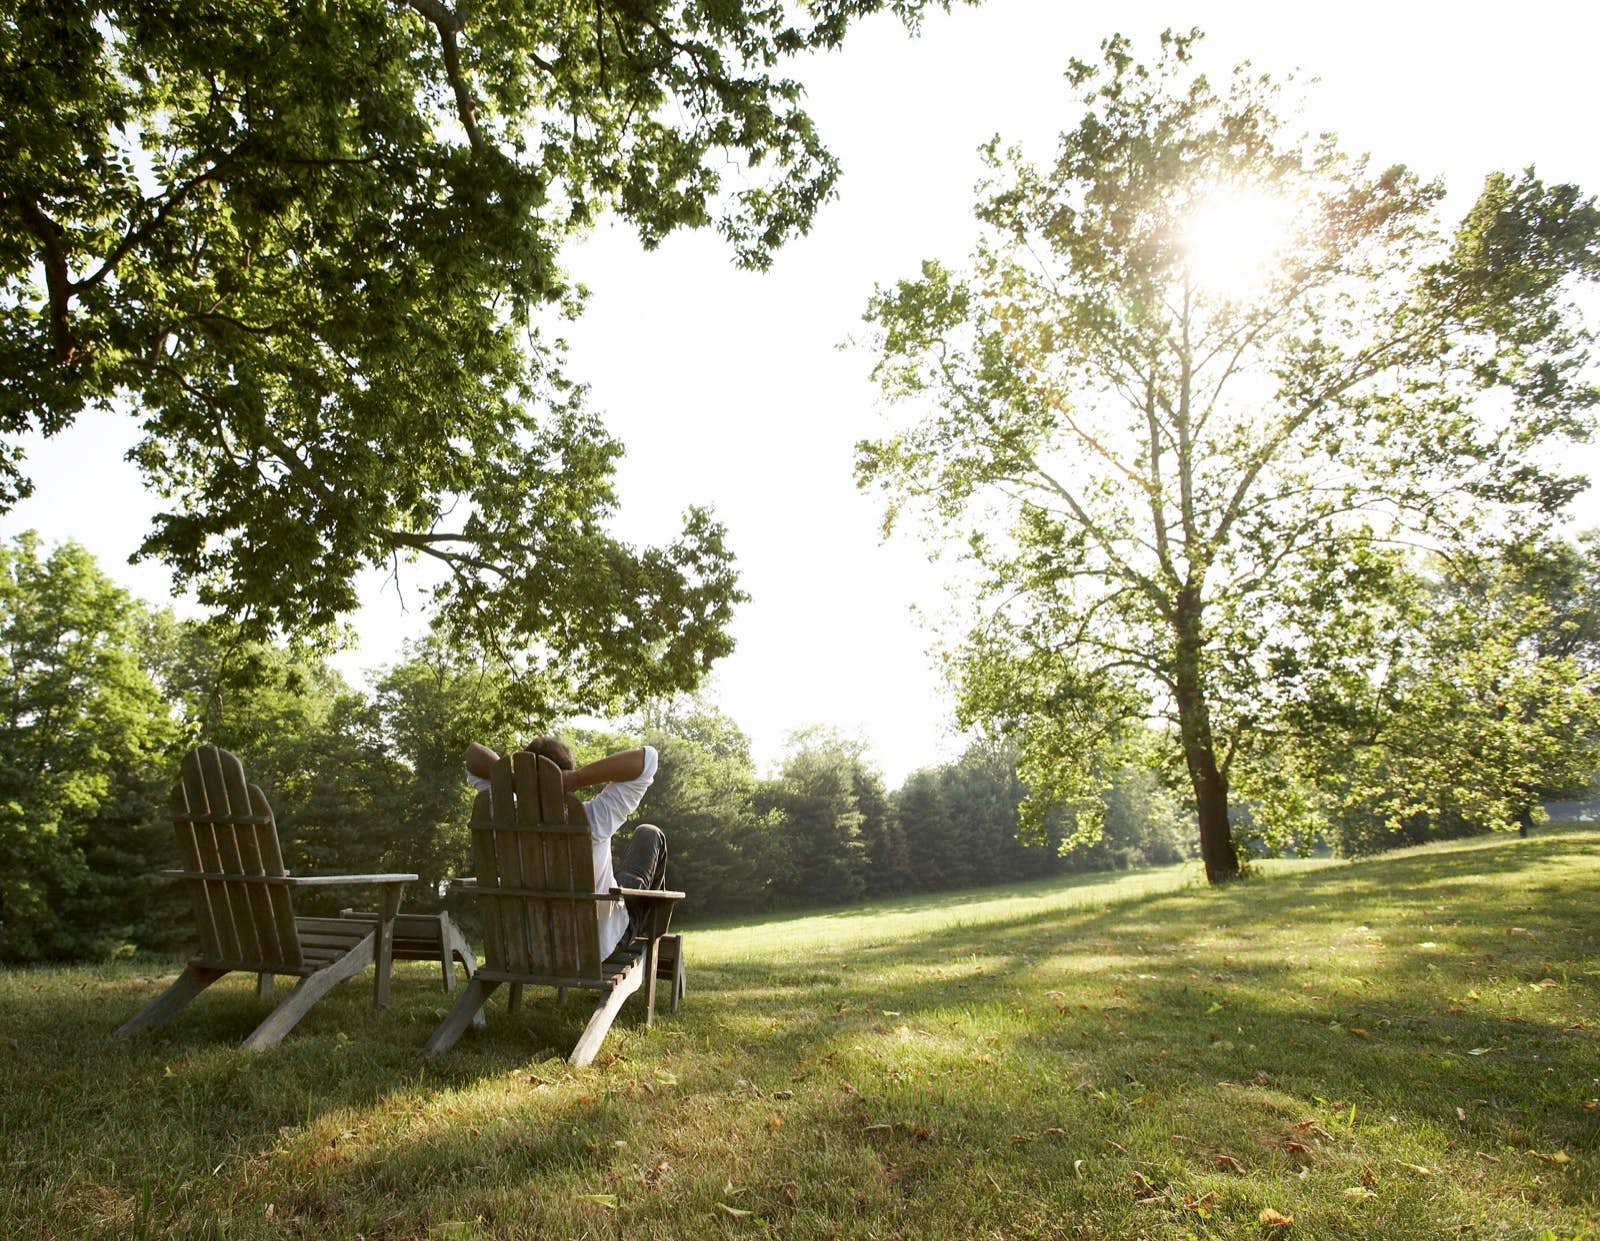 A man relaxes in a wooden chair on a grassy lawn